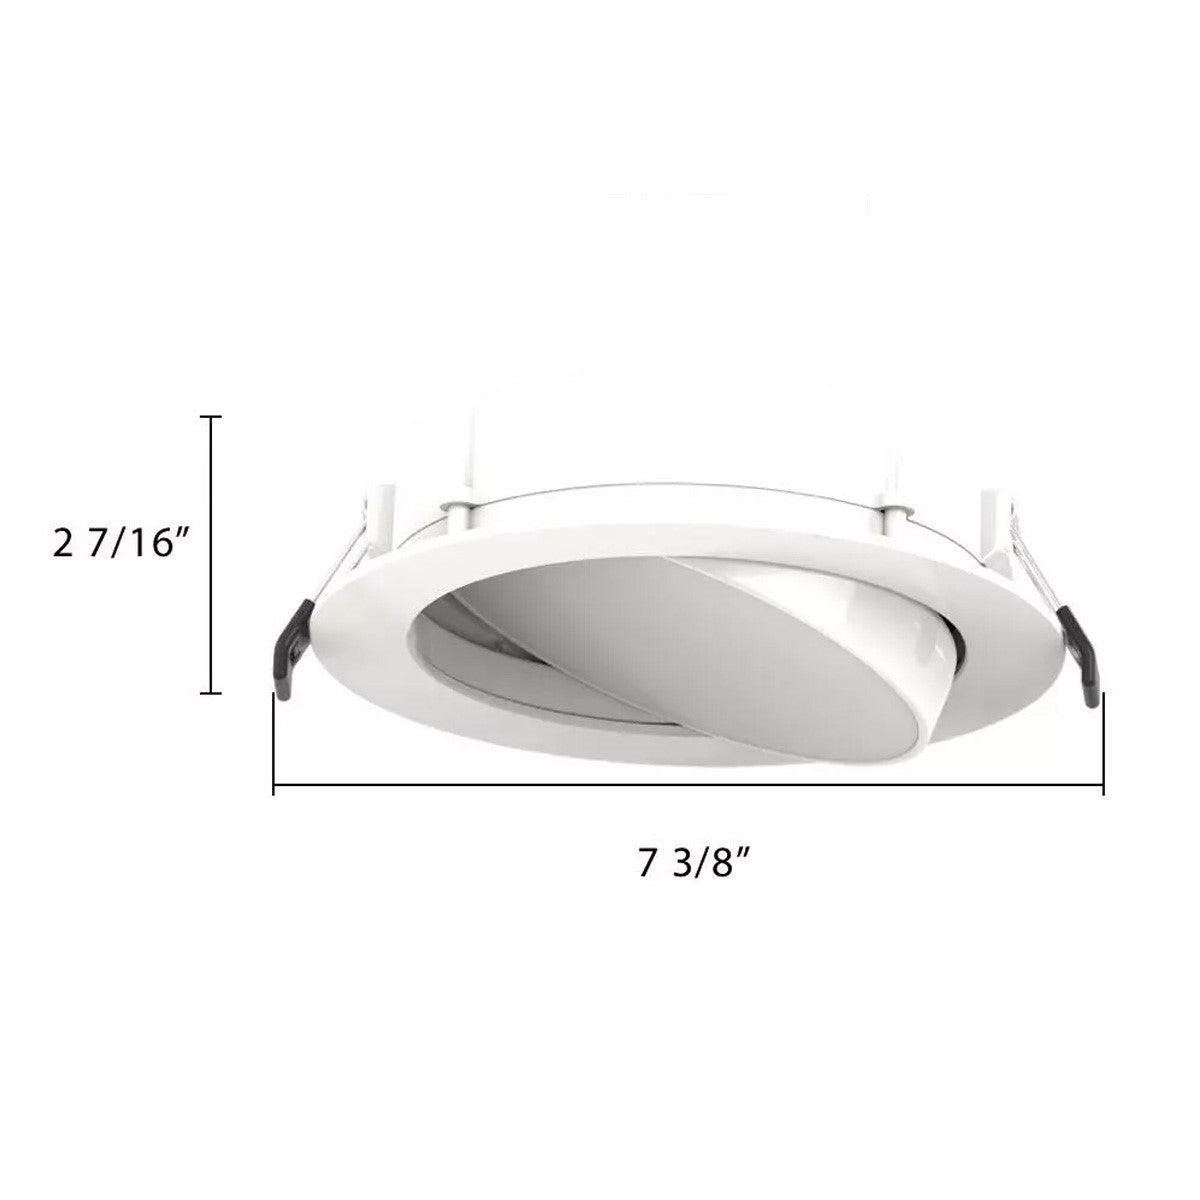 6 In. Adjustable Wafer Canless LED Recessed Light, 12 Watt, 1100 Lumens, Selectable CCT, 2700K to 5000K, Smooth Trim